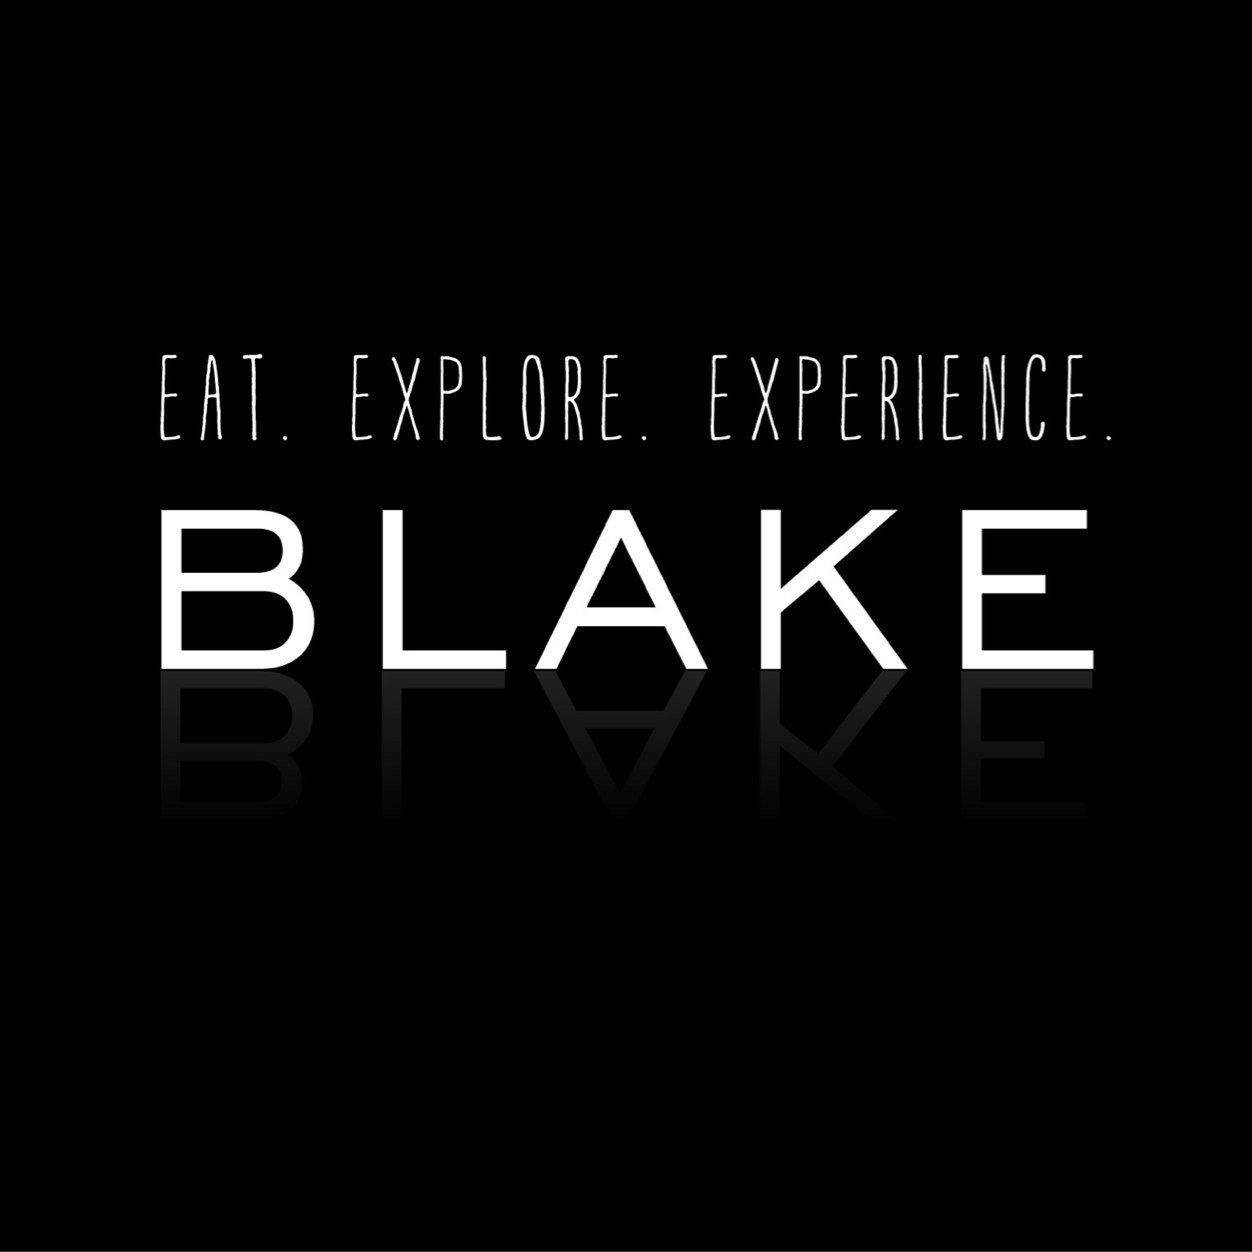 Eat. Explore. Experience 

Currently open for takeout & delivery 12pm-8pm 7 days a week. Blake Brewhouse beer available in 64oz growlers. Order online!